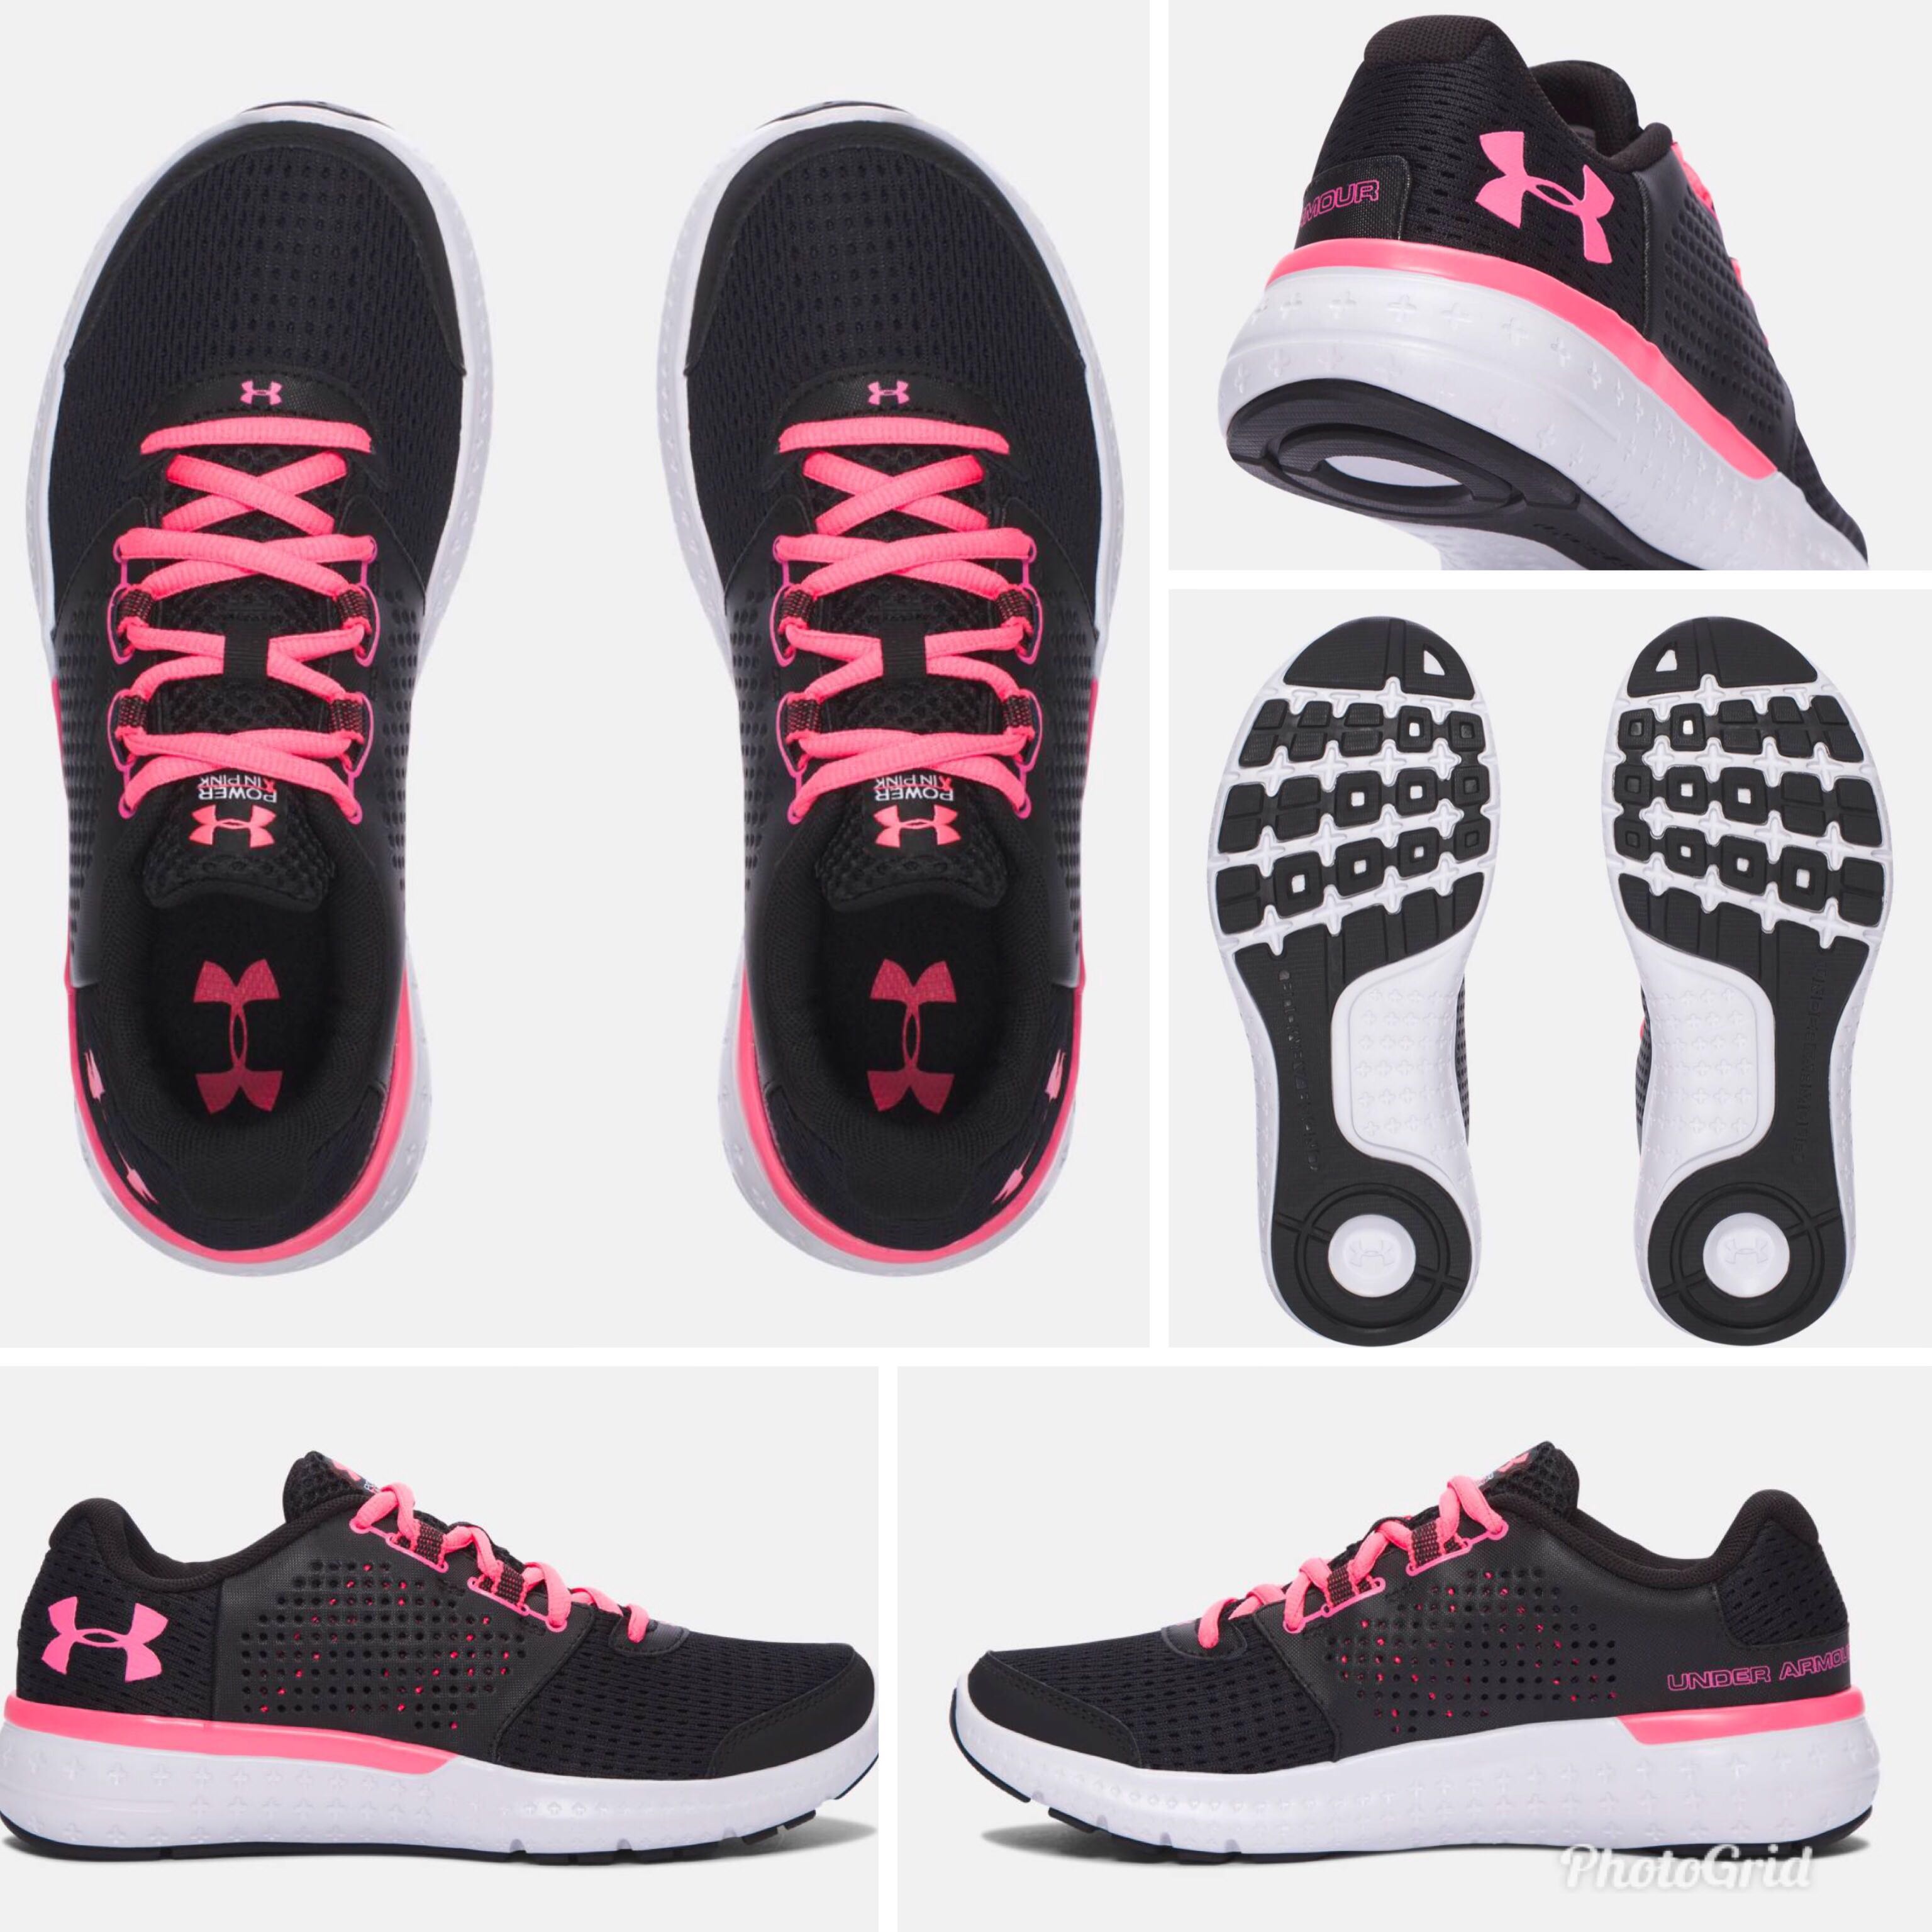 under armour micro g fuel women's